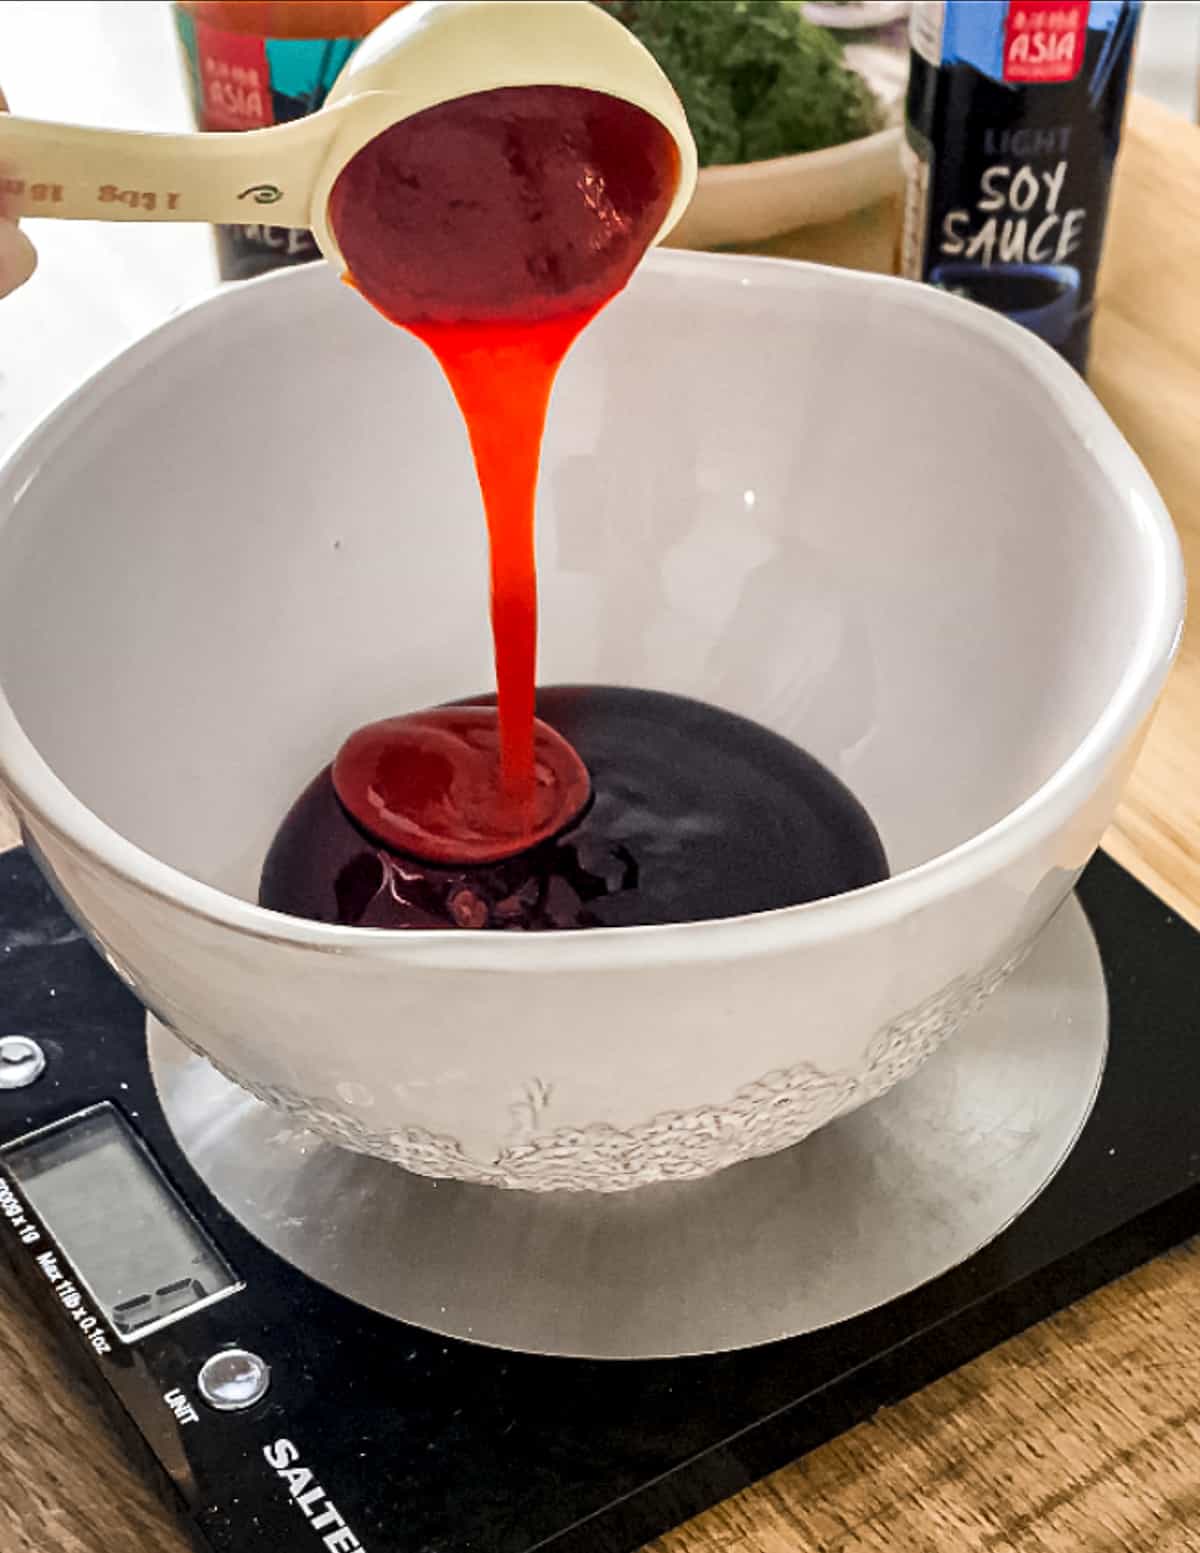 Sauce being added to a measuring cup.